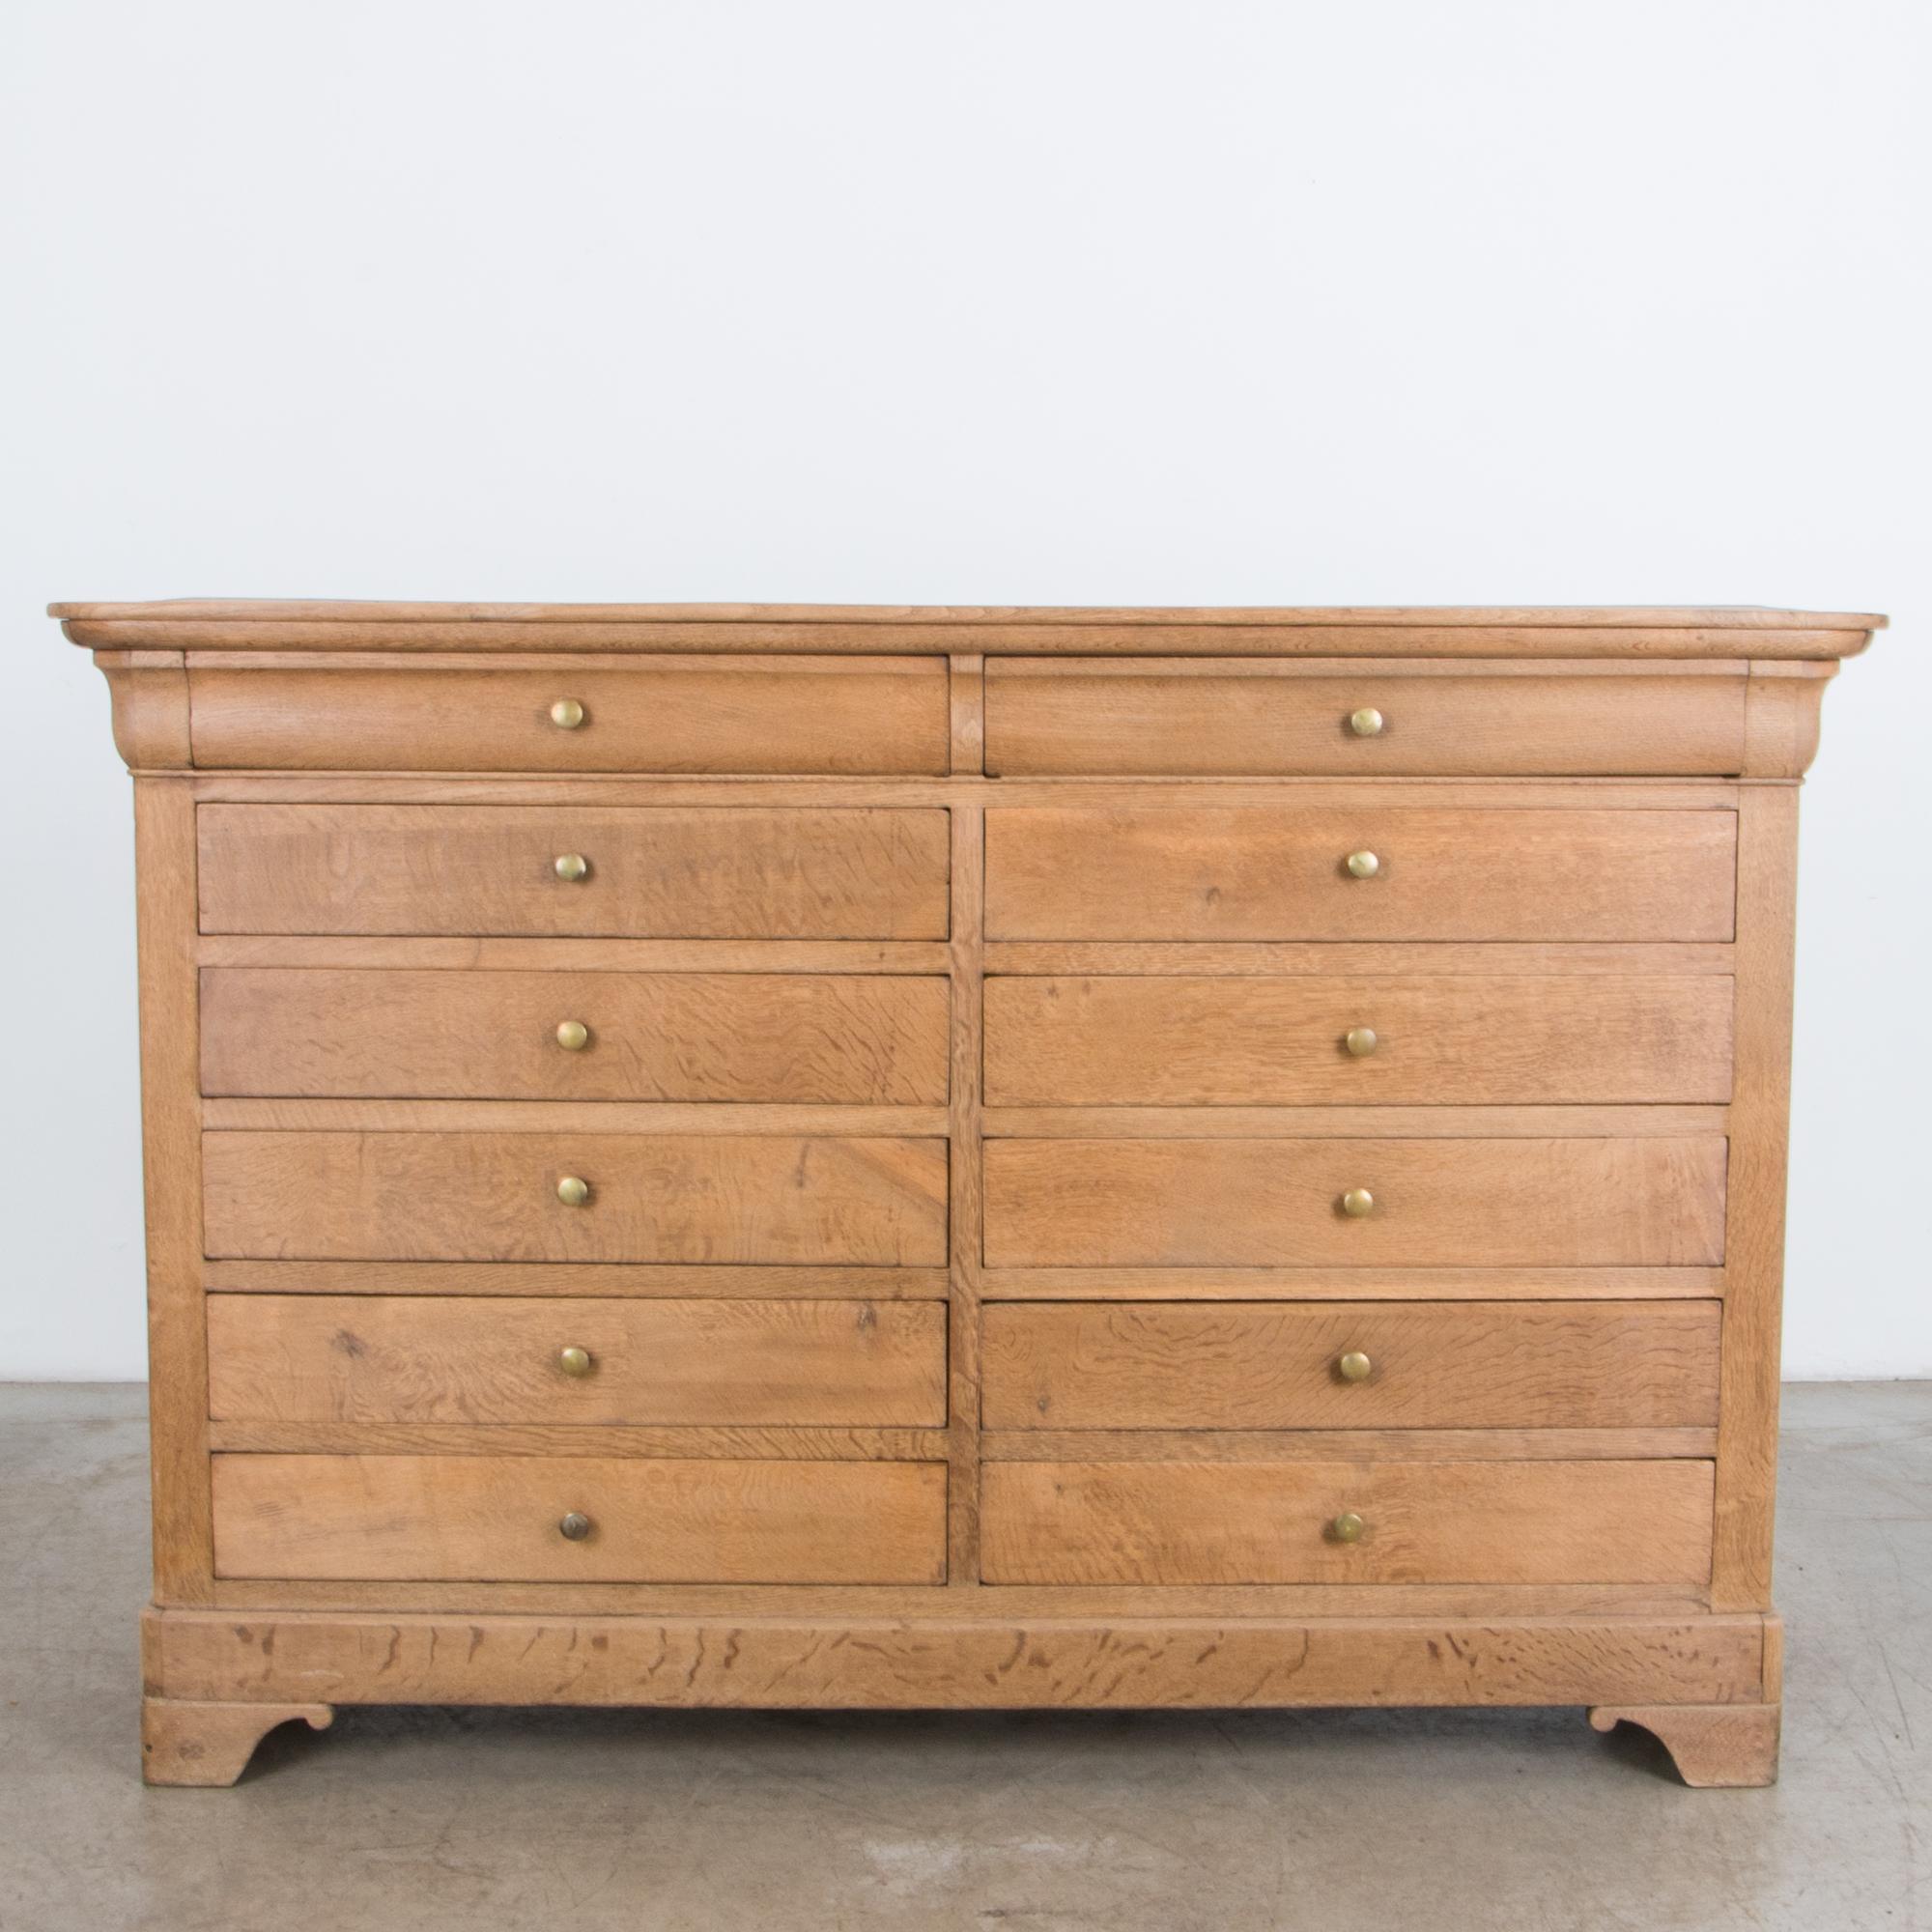 A distinctive drawer chest from circa 1880 France in distinctive curly oak. An elegant shape is simple yet refined, with clean lines and subtle ornament; a flared top, simplified scroll legs. A unique large format features twelve drawers, with